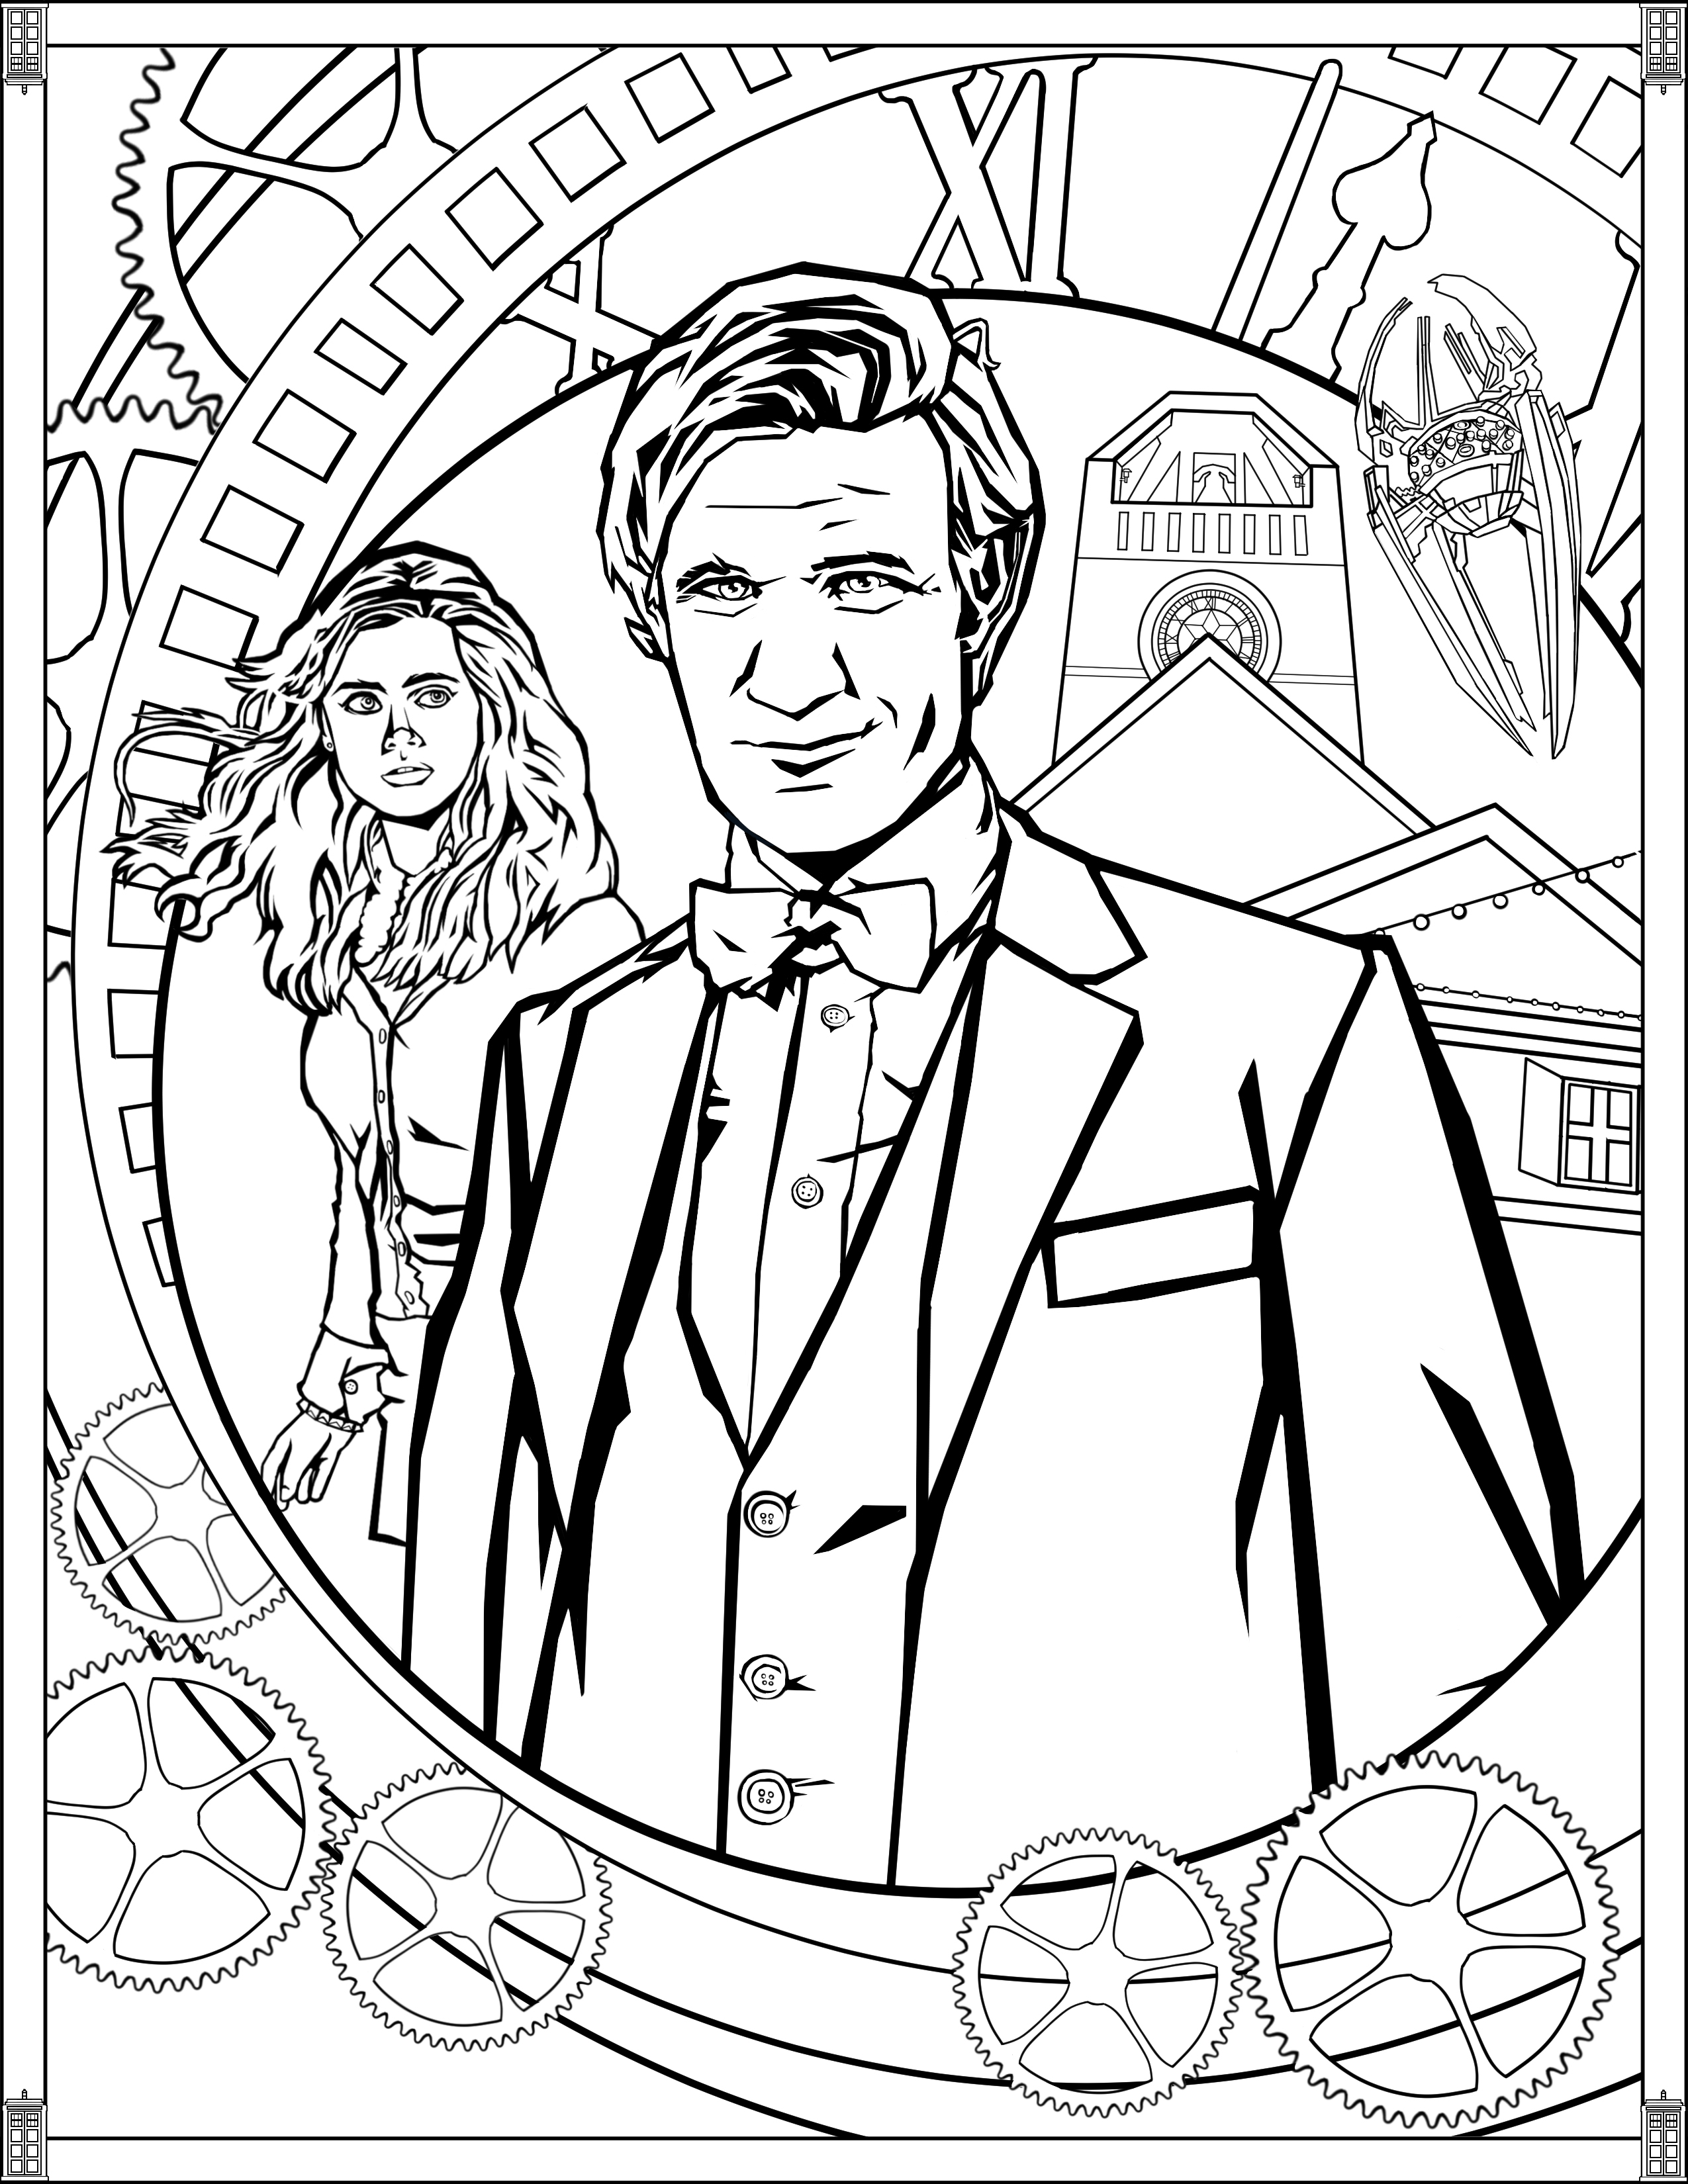 Doctor Who: Wibbly Wobbly Timey Wimey Coloring Pages [Printables] - FUN.com  Blog